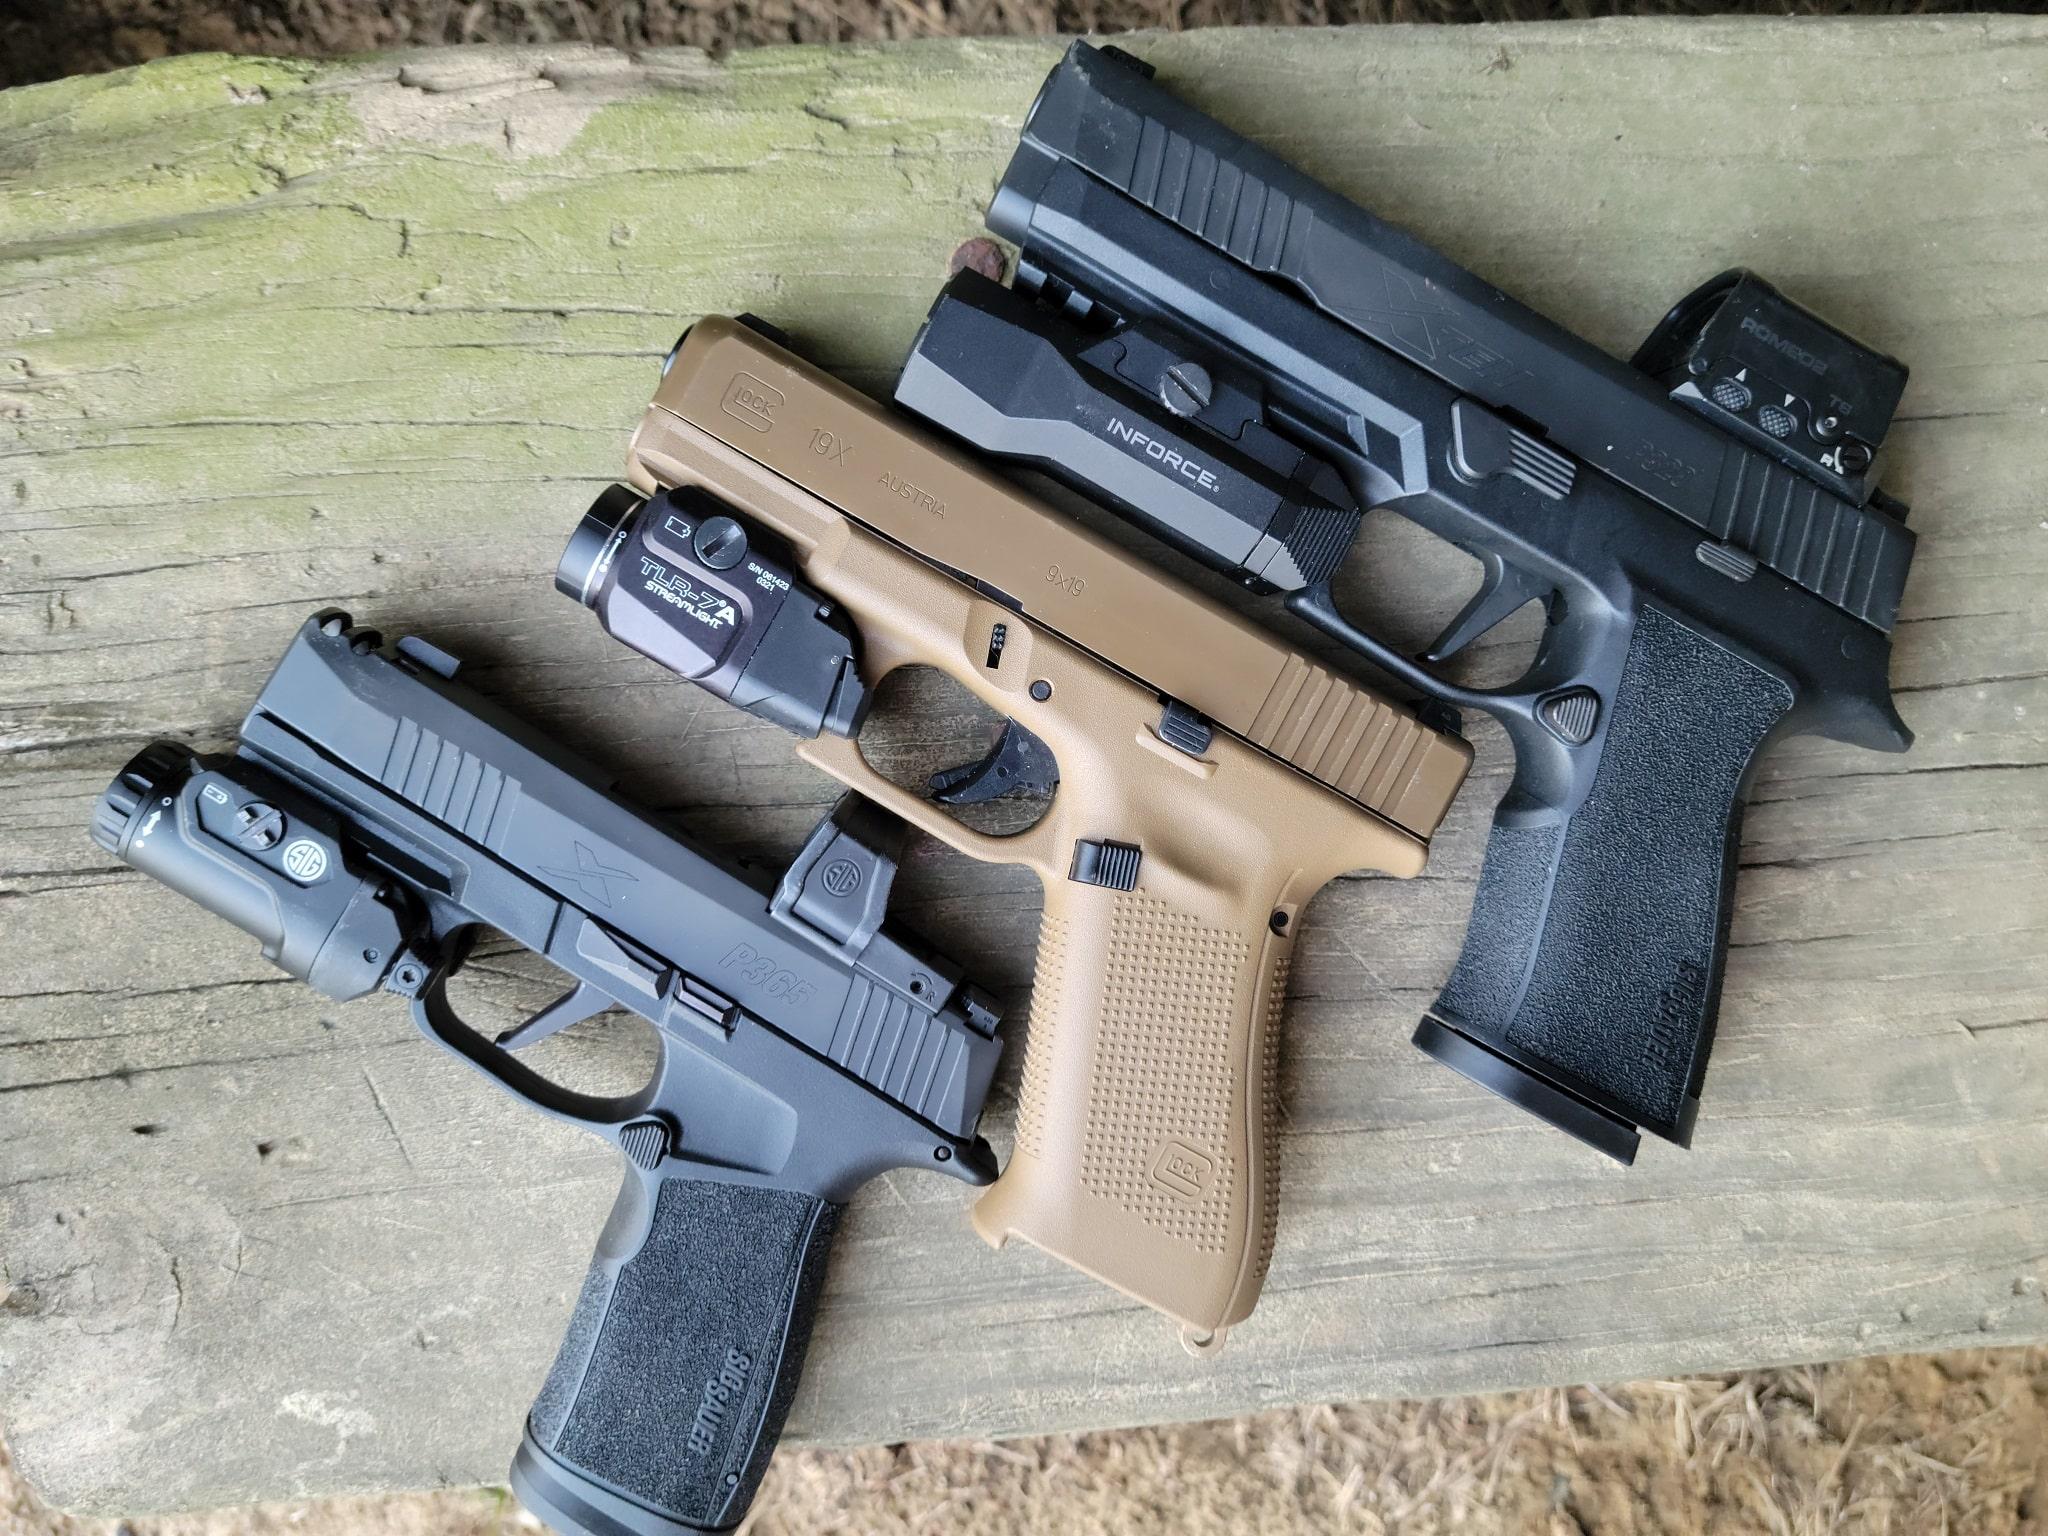 Many pistols offer a full size rail that gives you room for a light, laser, or other accessory and optics cut for adding an MRD.